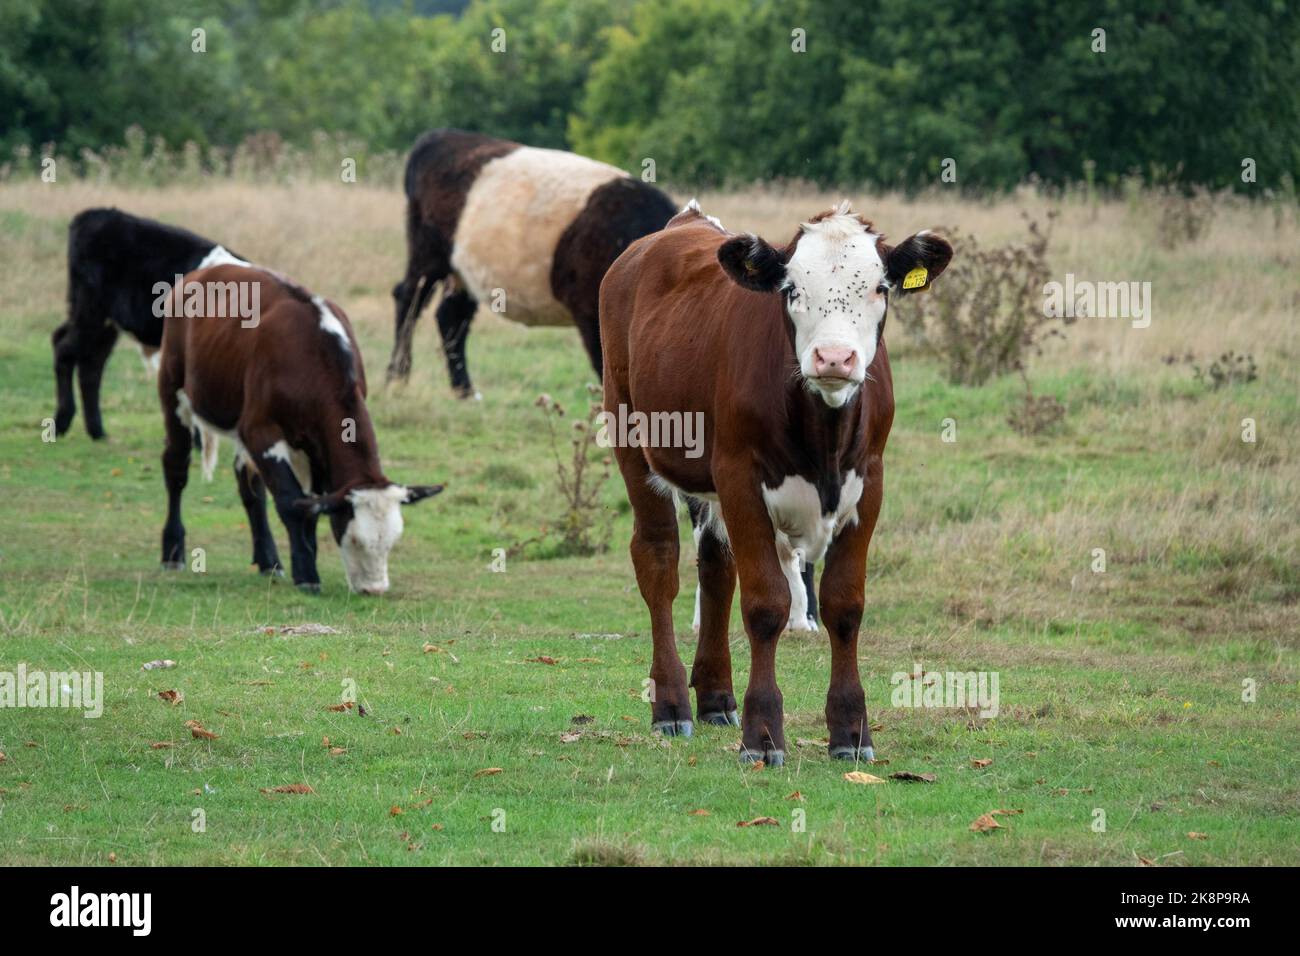 pretty brown and white calf young cow Stock Photo